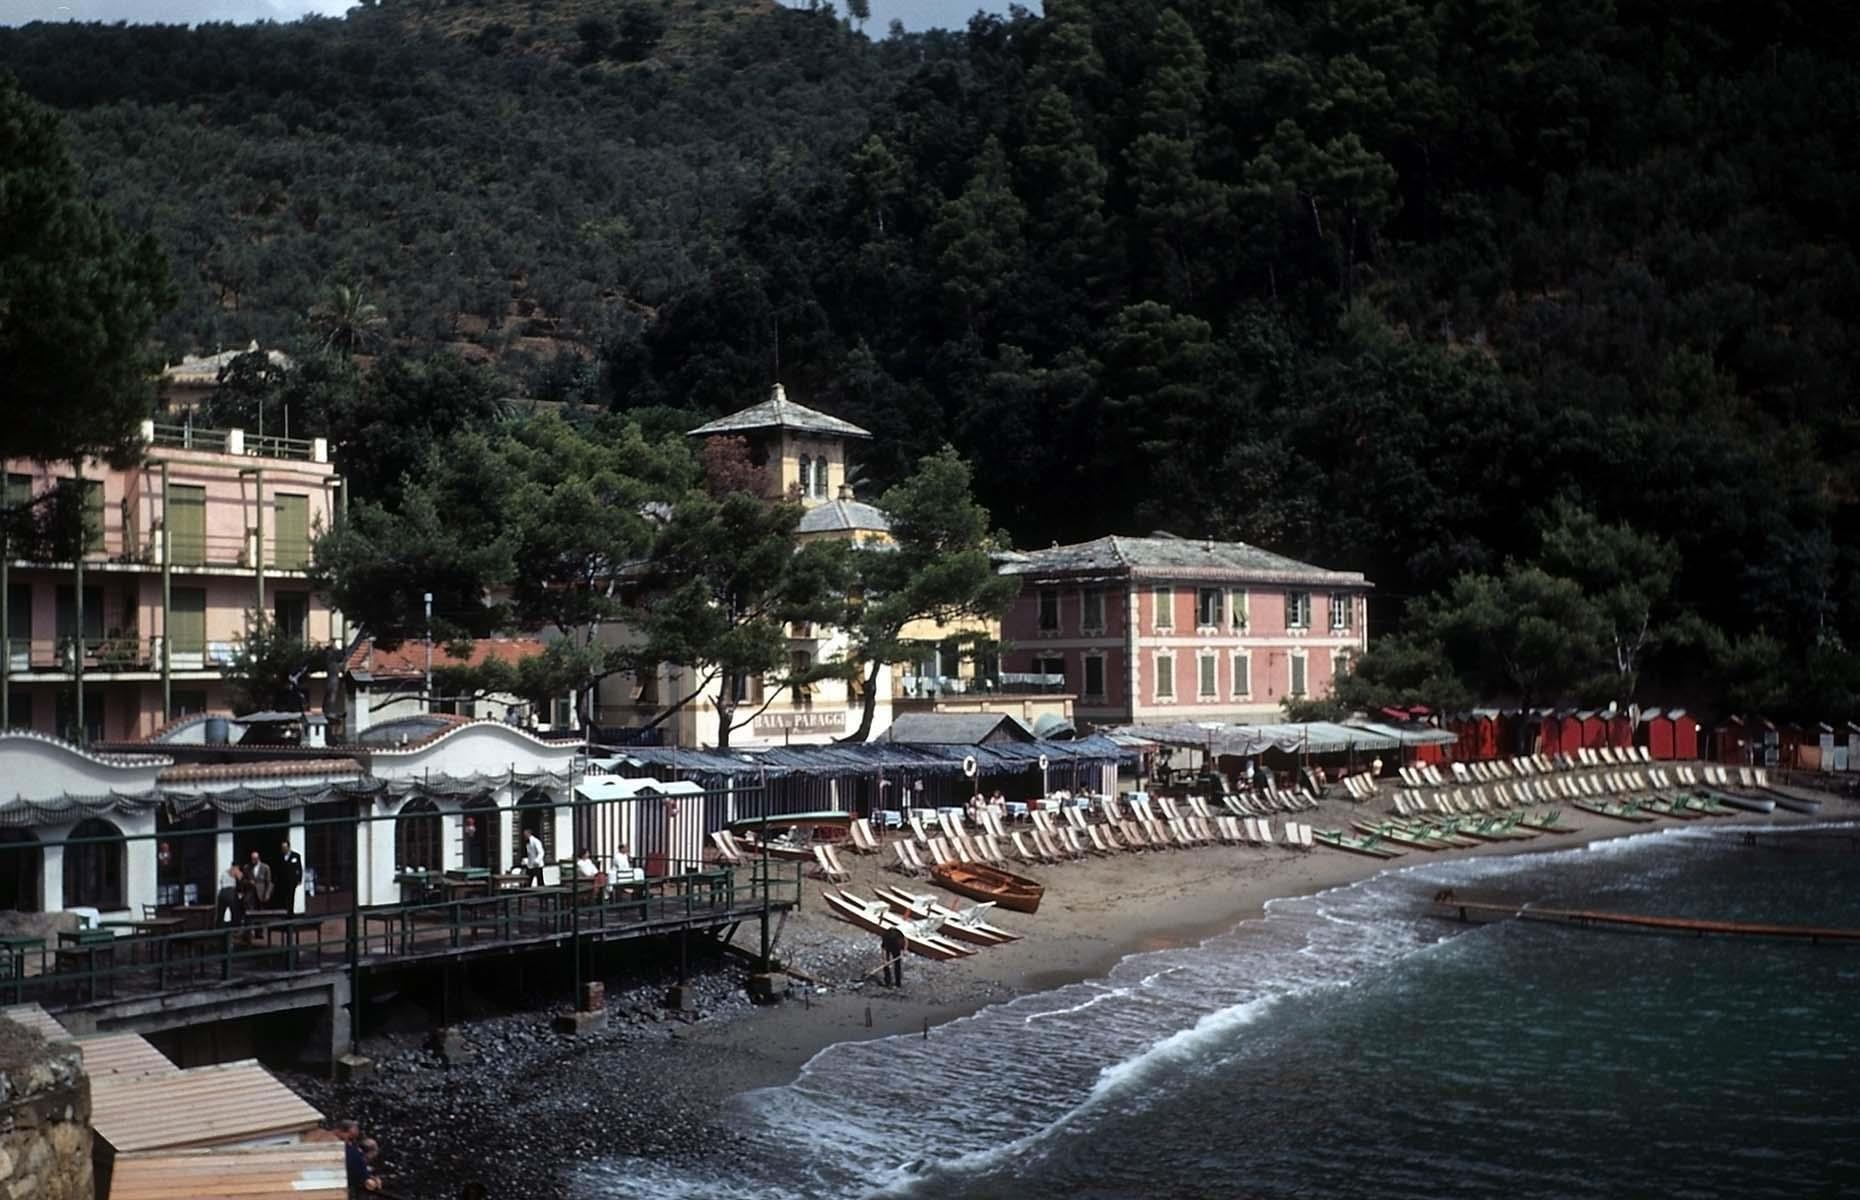 Another Italian destination making the most of wealthy visitors was the Italian Riviera. Stretching along the Ligurian coast, from the French border to La Spezia, the region has captured the hearts of many over the decades, from writers and poets to fashion designers and movie stars. Here, a hotel on Paraggi Beach is captured in the early morning in 1948, with its beach chairs unfolded ready for sunbathers.